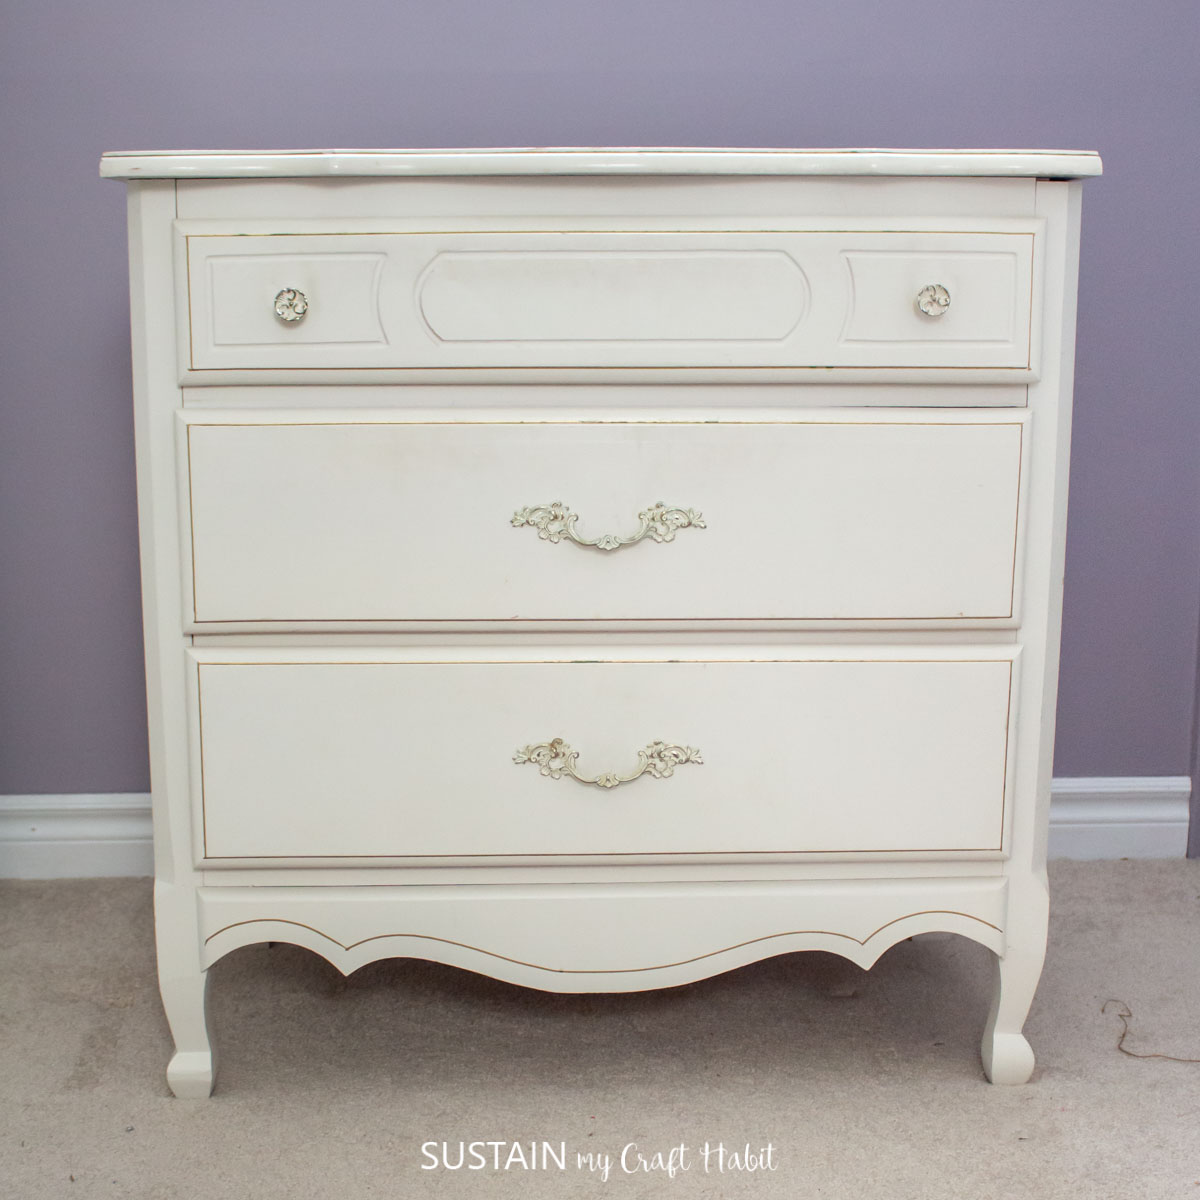 Before image of the cream French country style dresser.